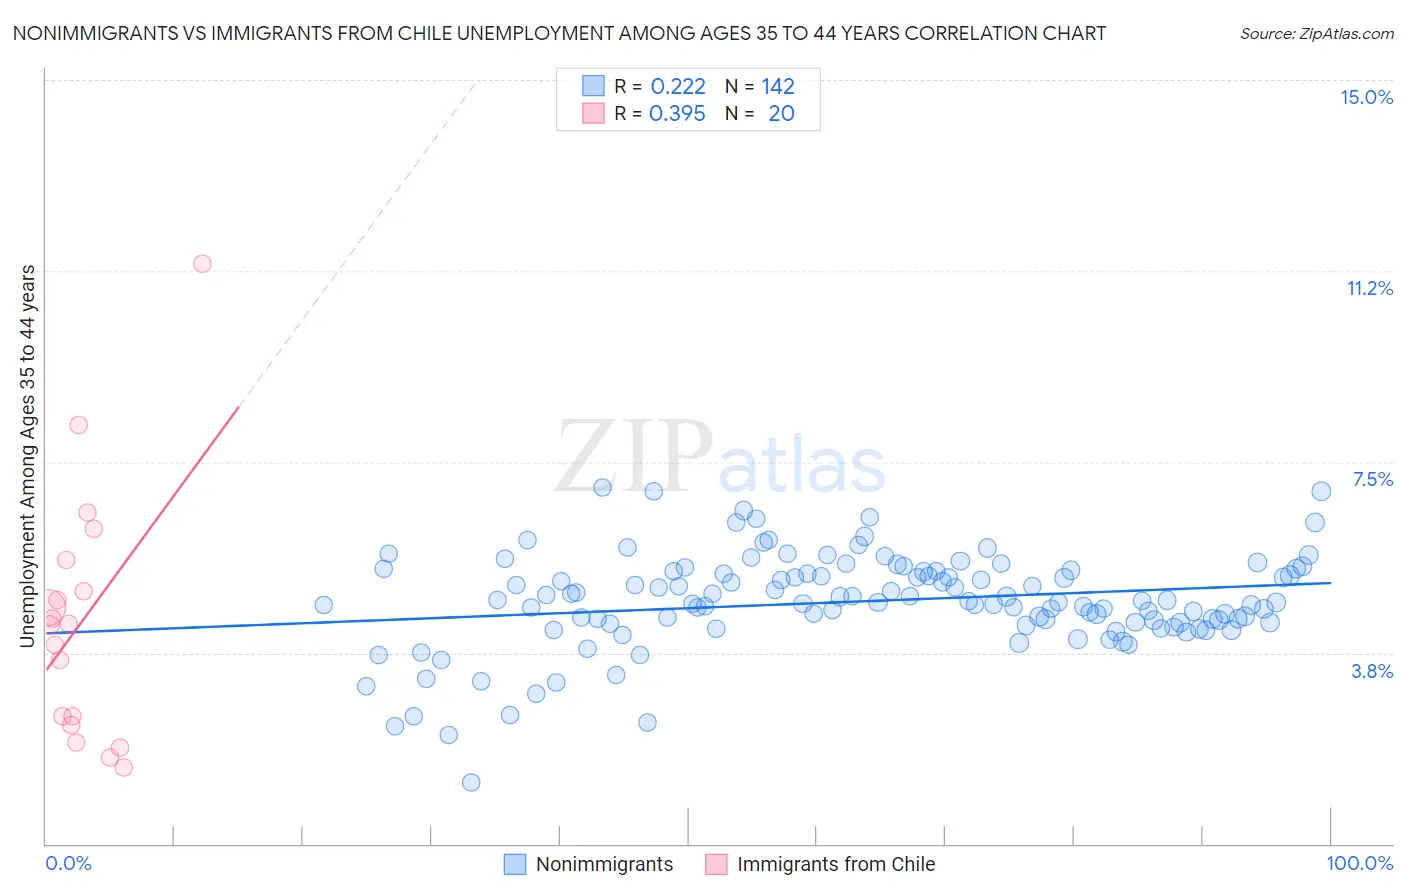 Nonimmigrants vs Immigrants from Chile Unemployment Among Ages 35 to 44 years